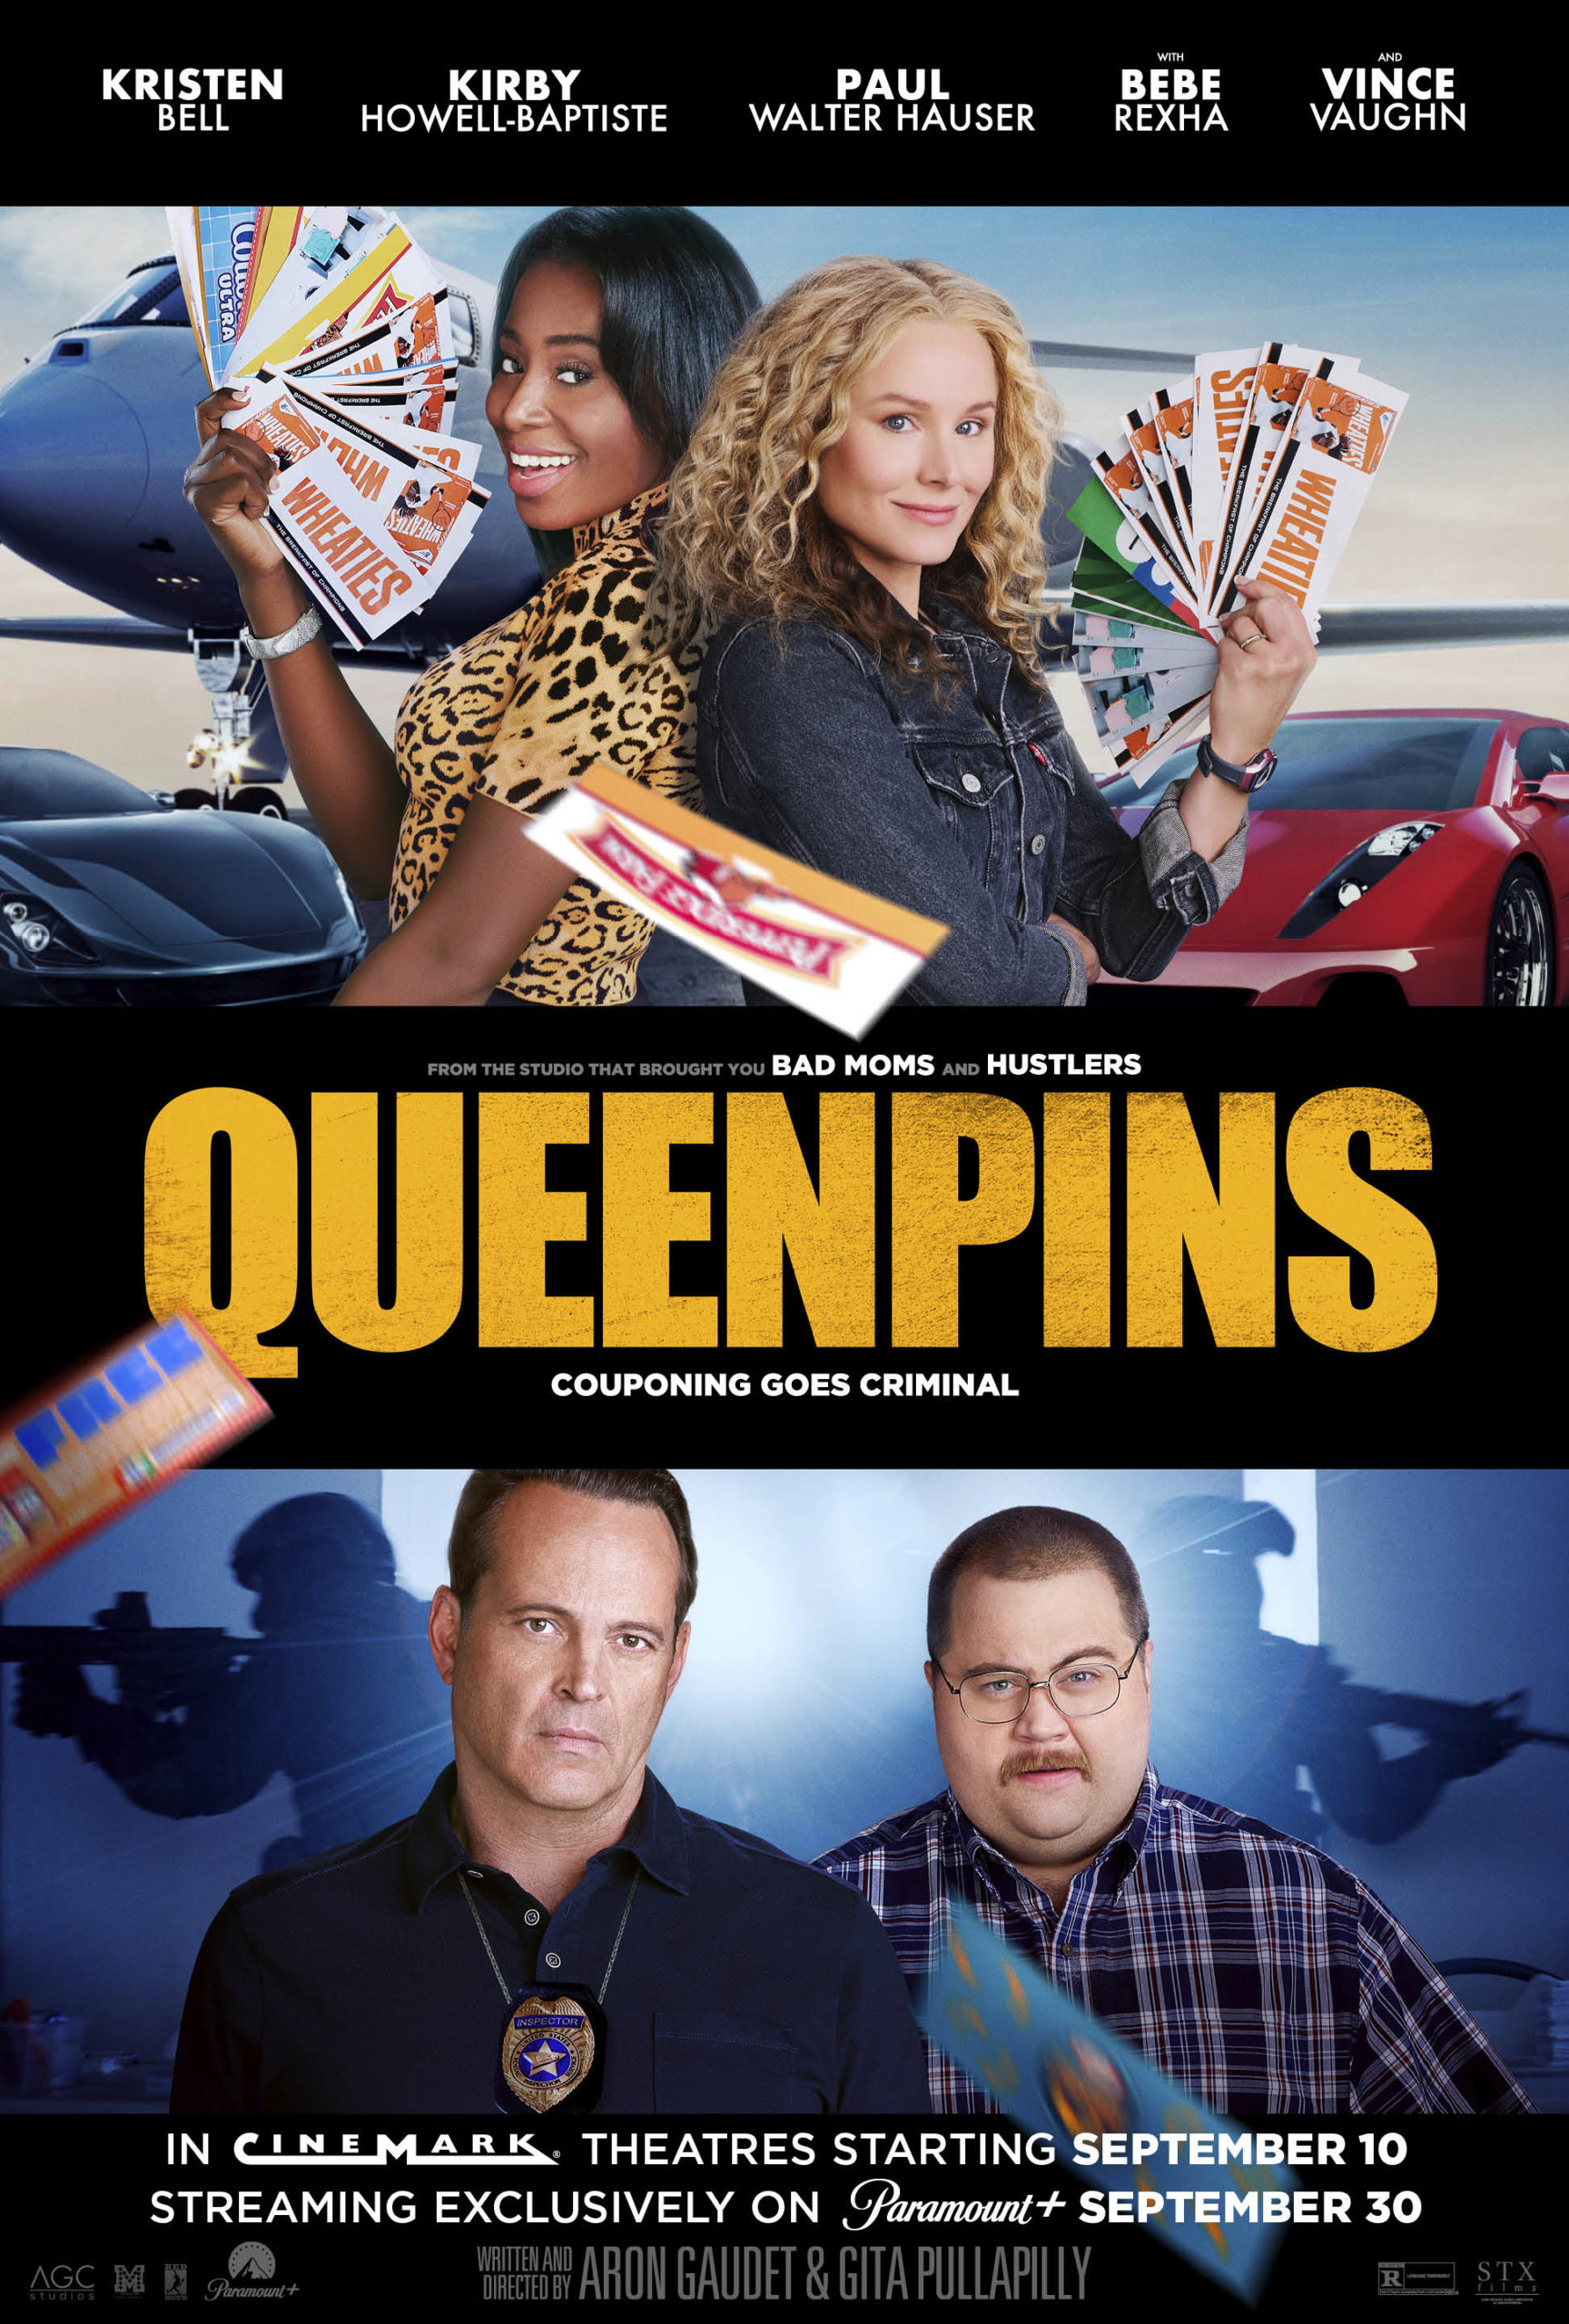 QUEENPINS: Get Passes to an Early Screening